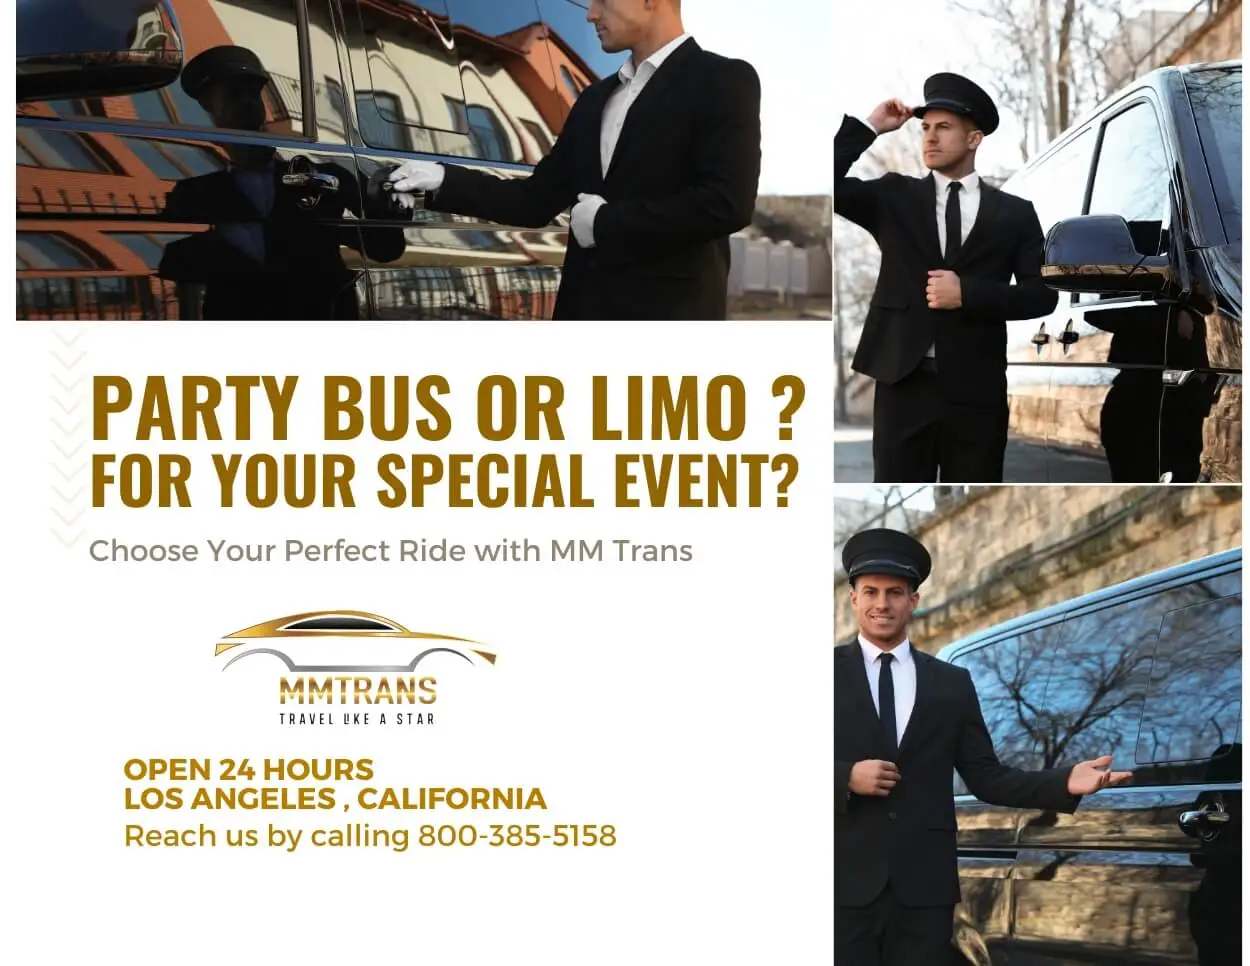 Party Bus Or Limo For Your Special Event